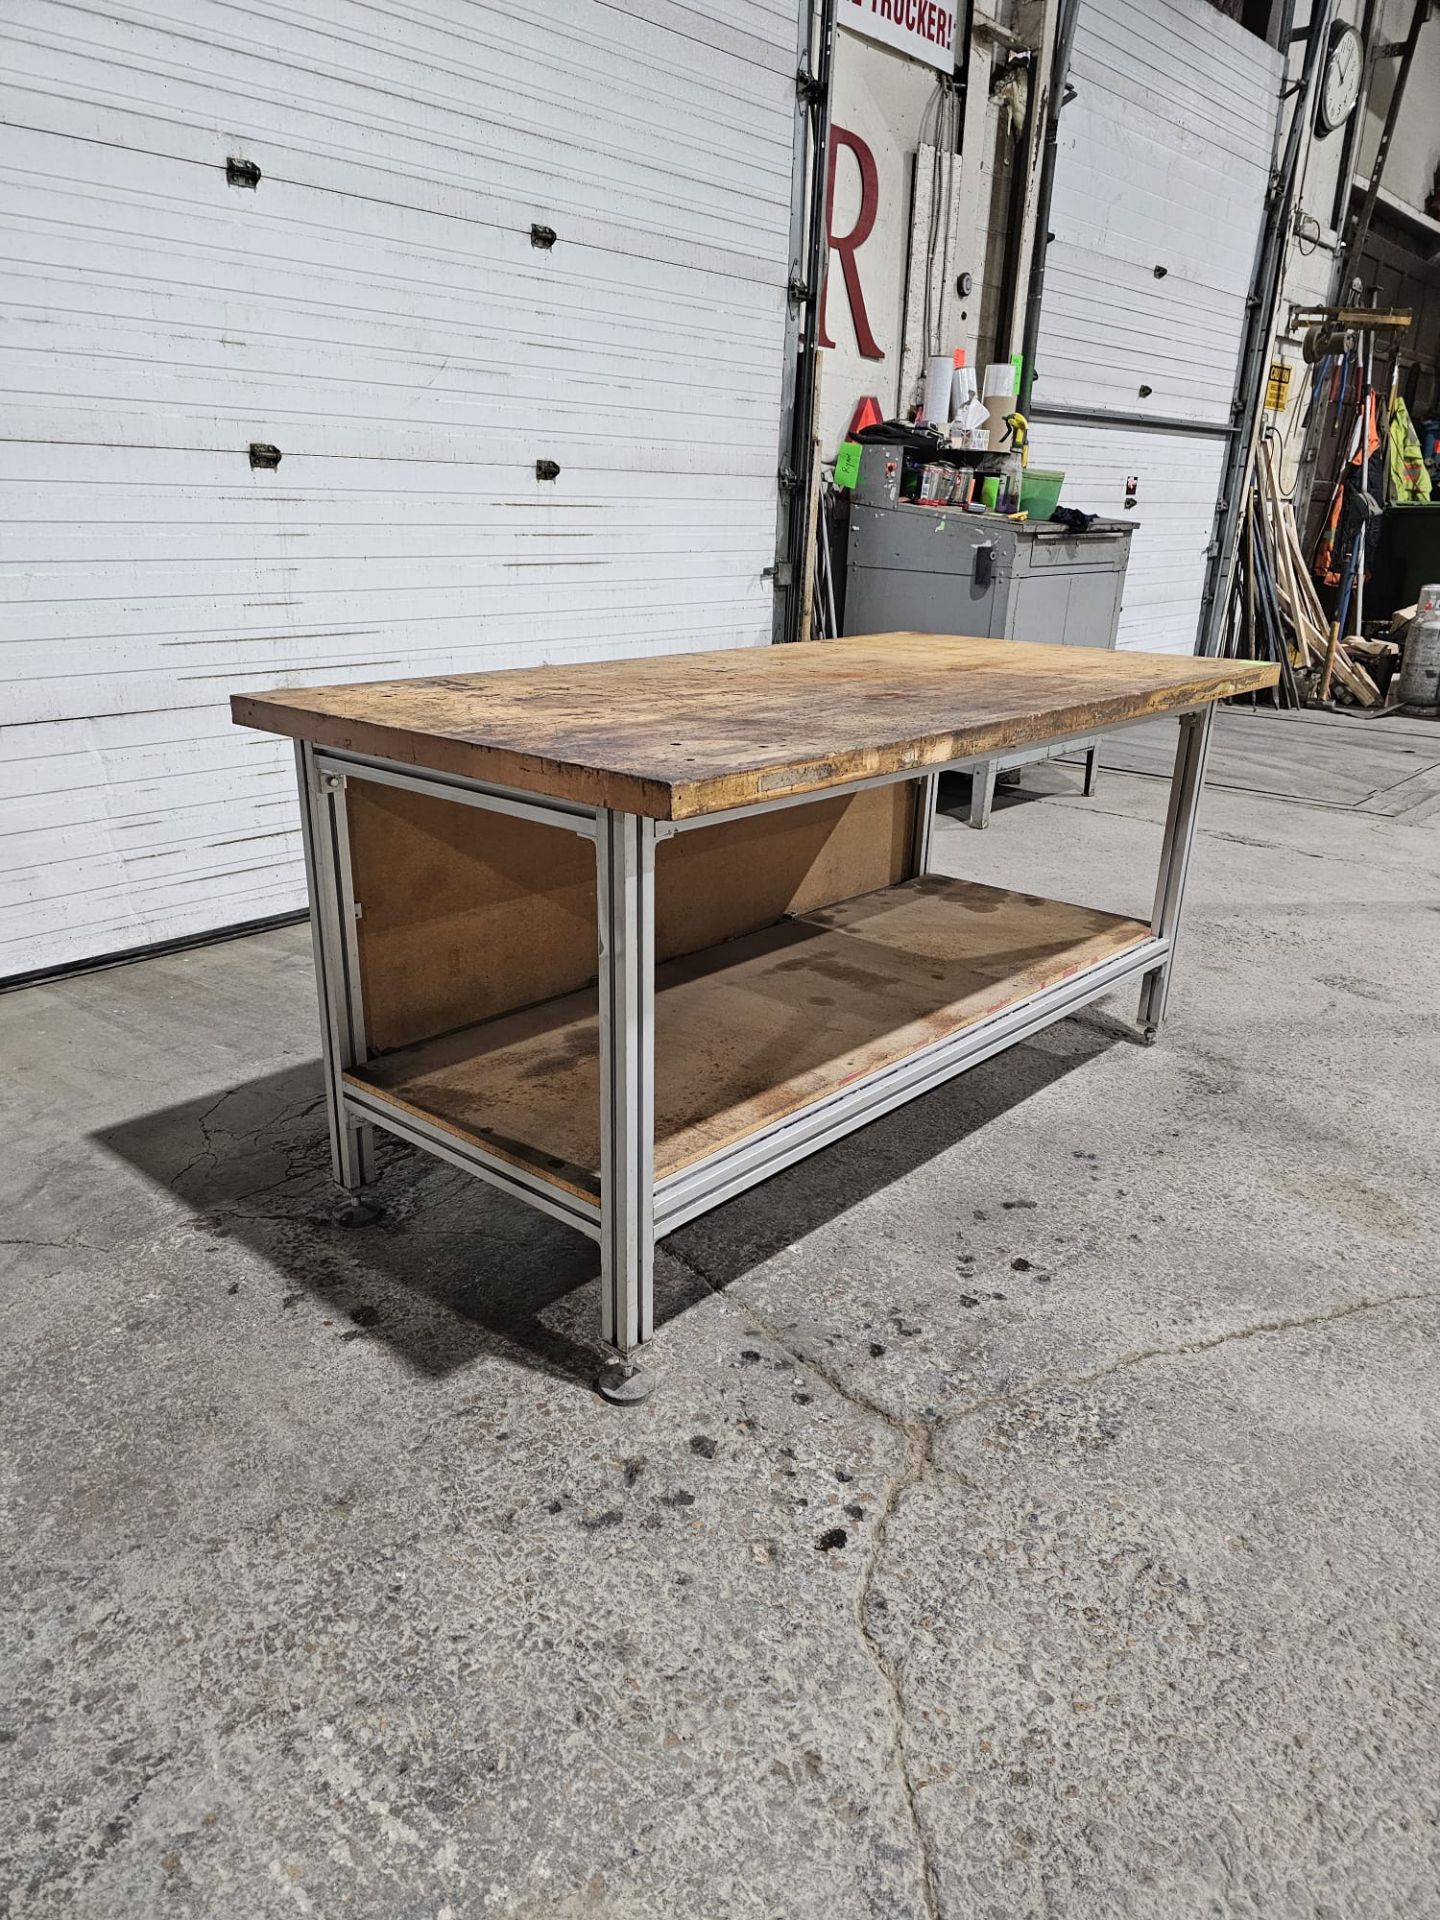 Table 36" x 72" x 34.5"h bottom shelf: 24" w x 69" - Aluminum frame with wooden top - Image 3 of 6